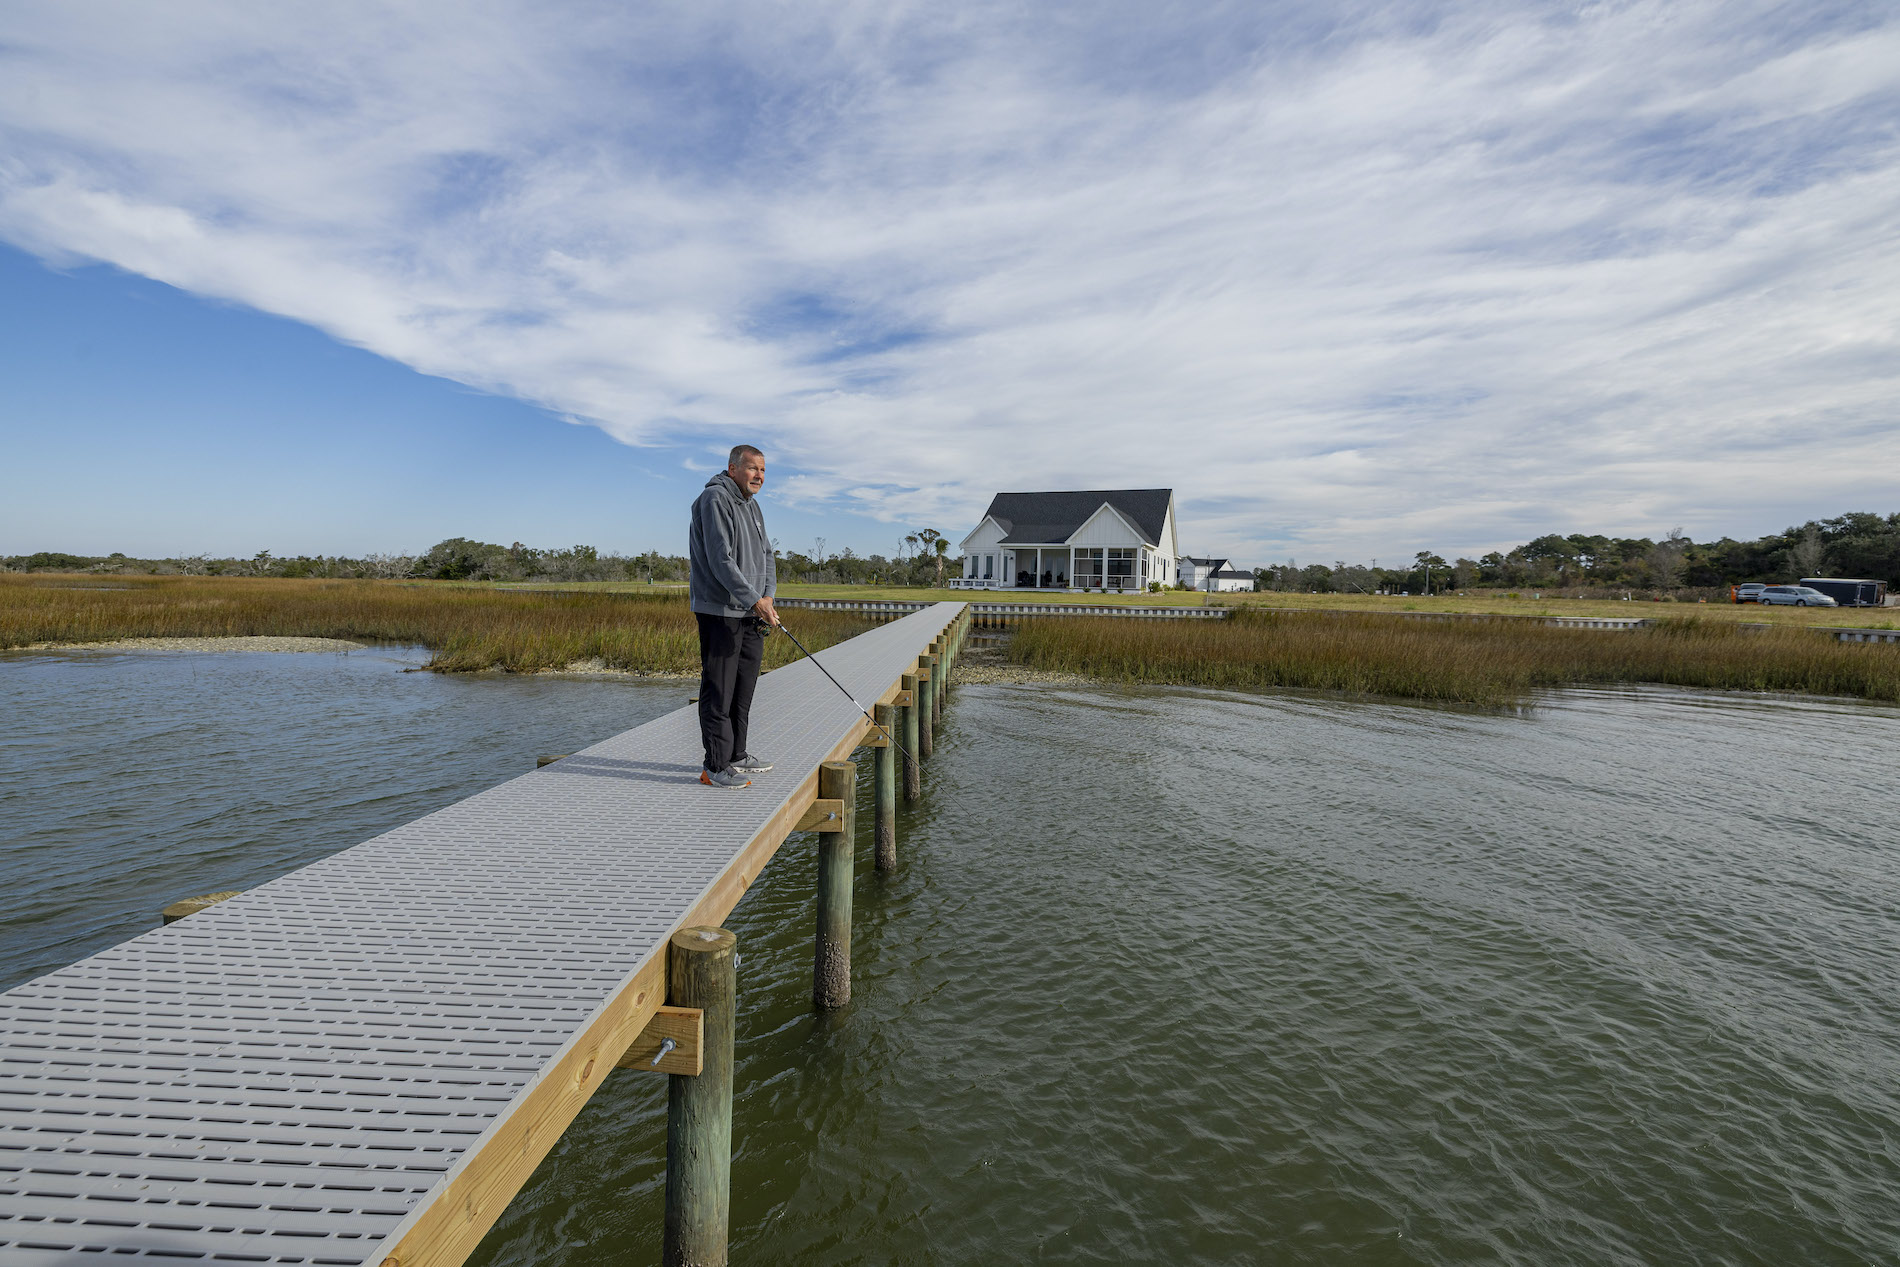 Man fishing off a wooden framed pier with Titan classic decking. Blue skies and a white house in the background.